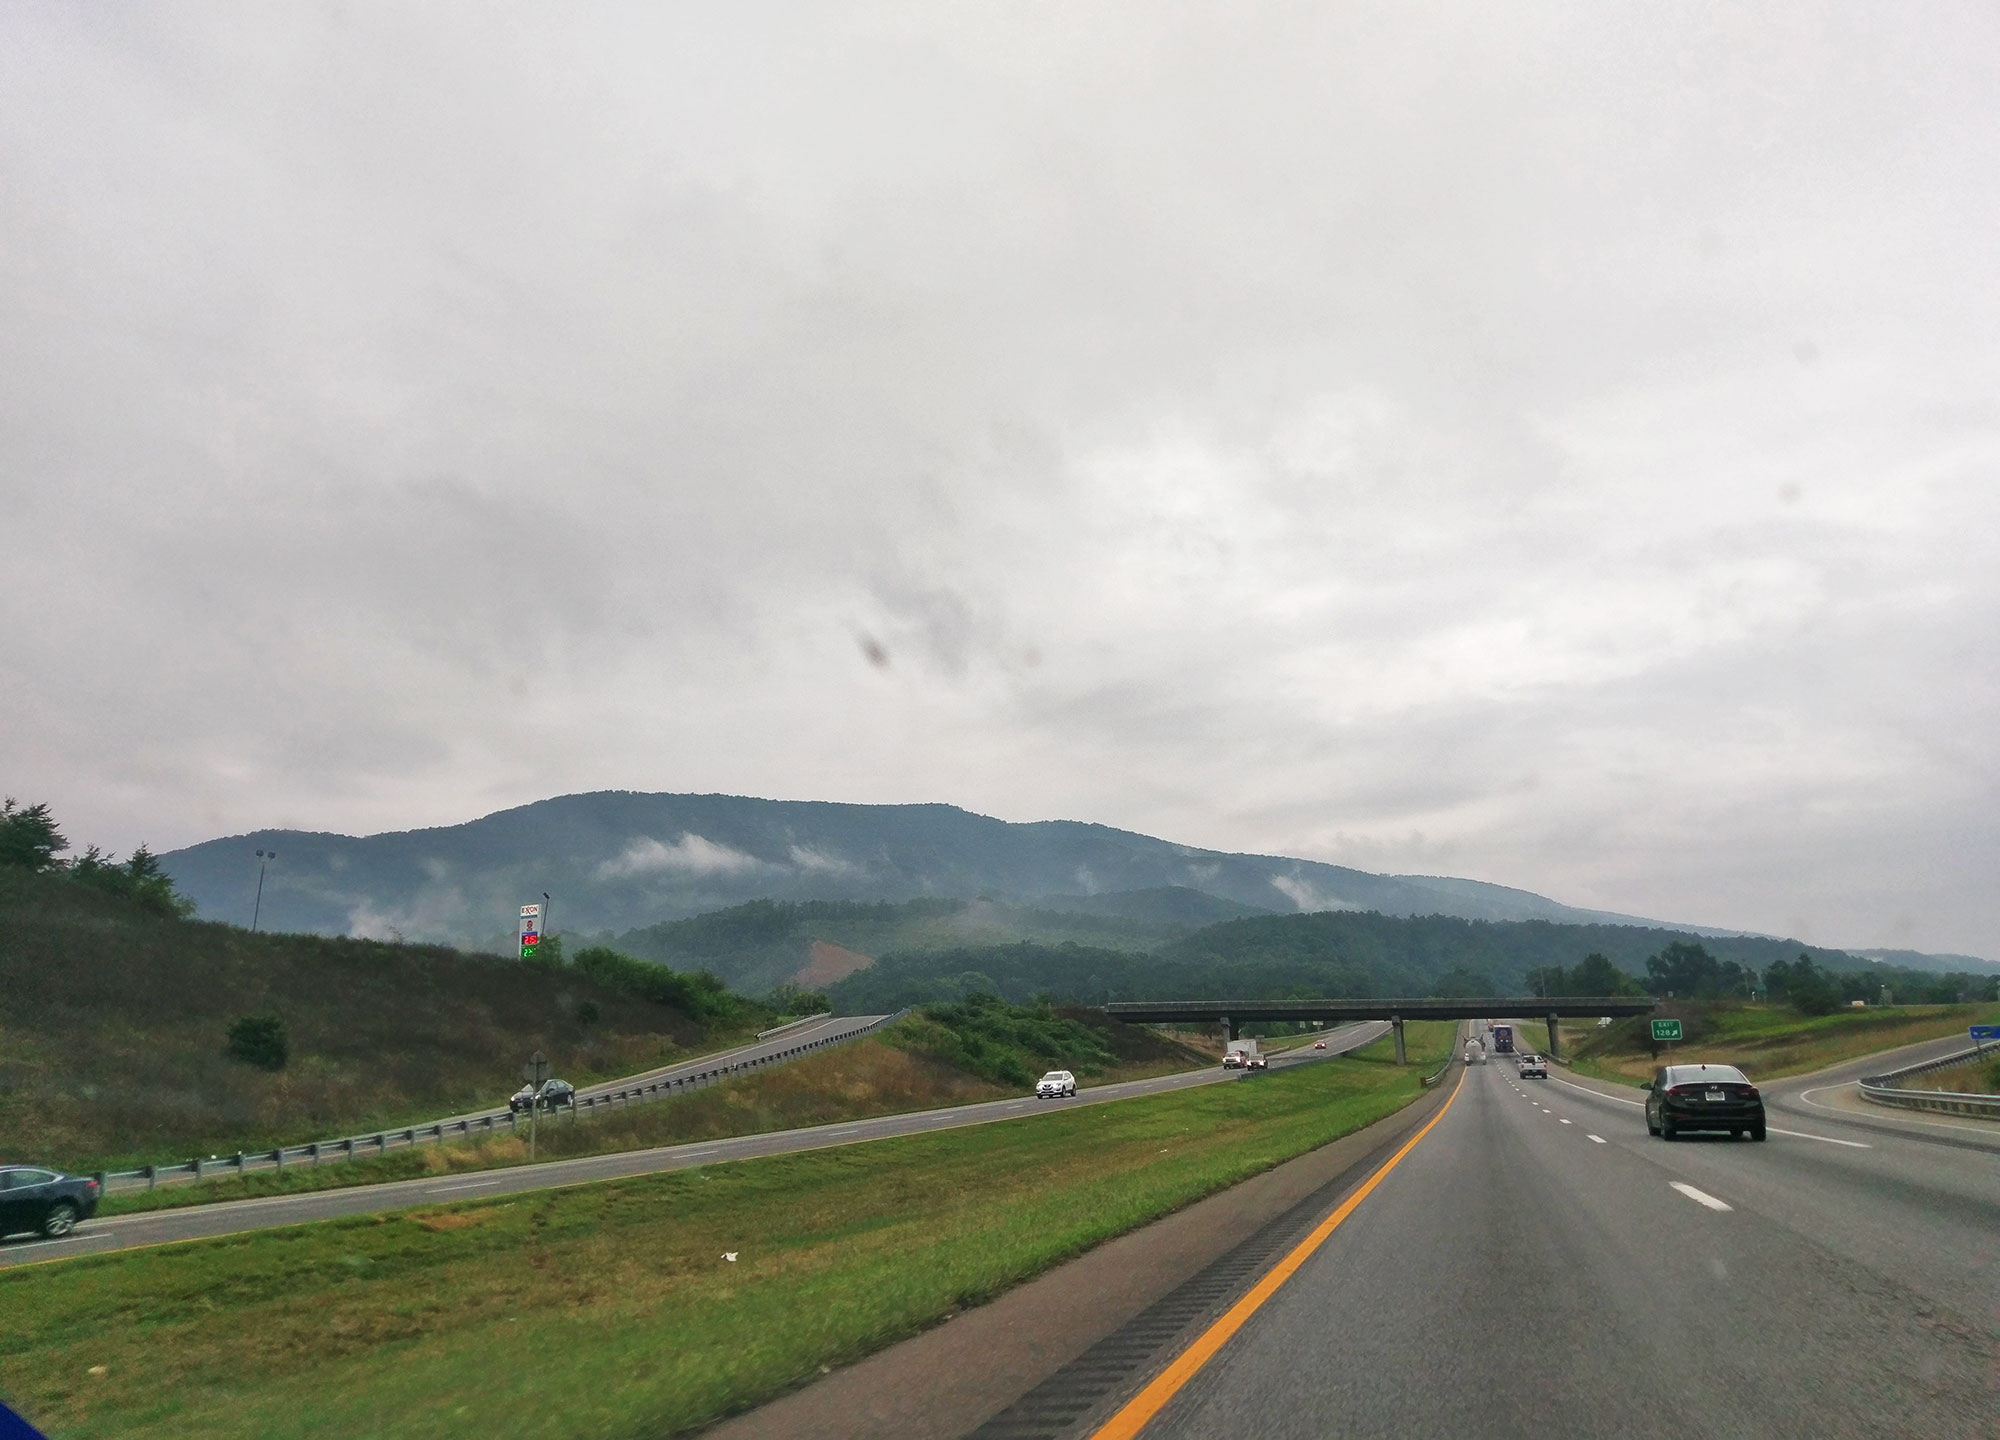 Driving through the Appalachian Mountains in Tennessee.